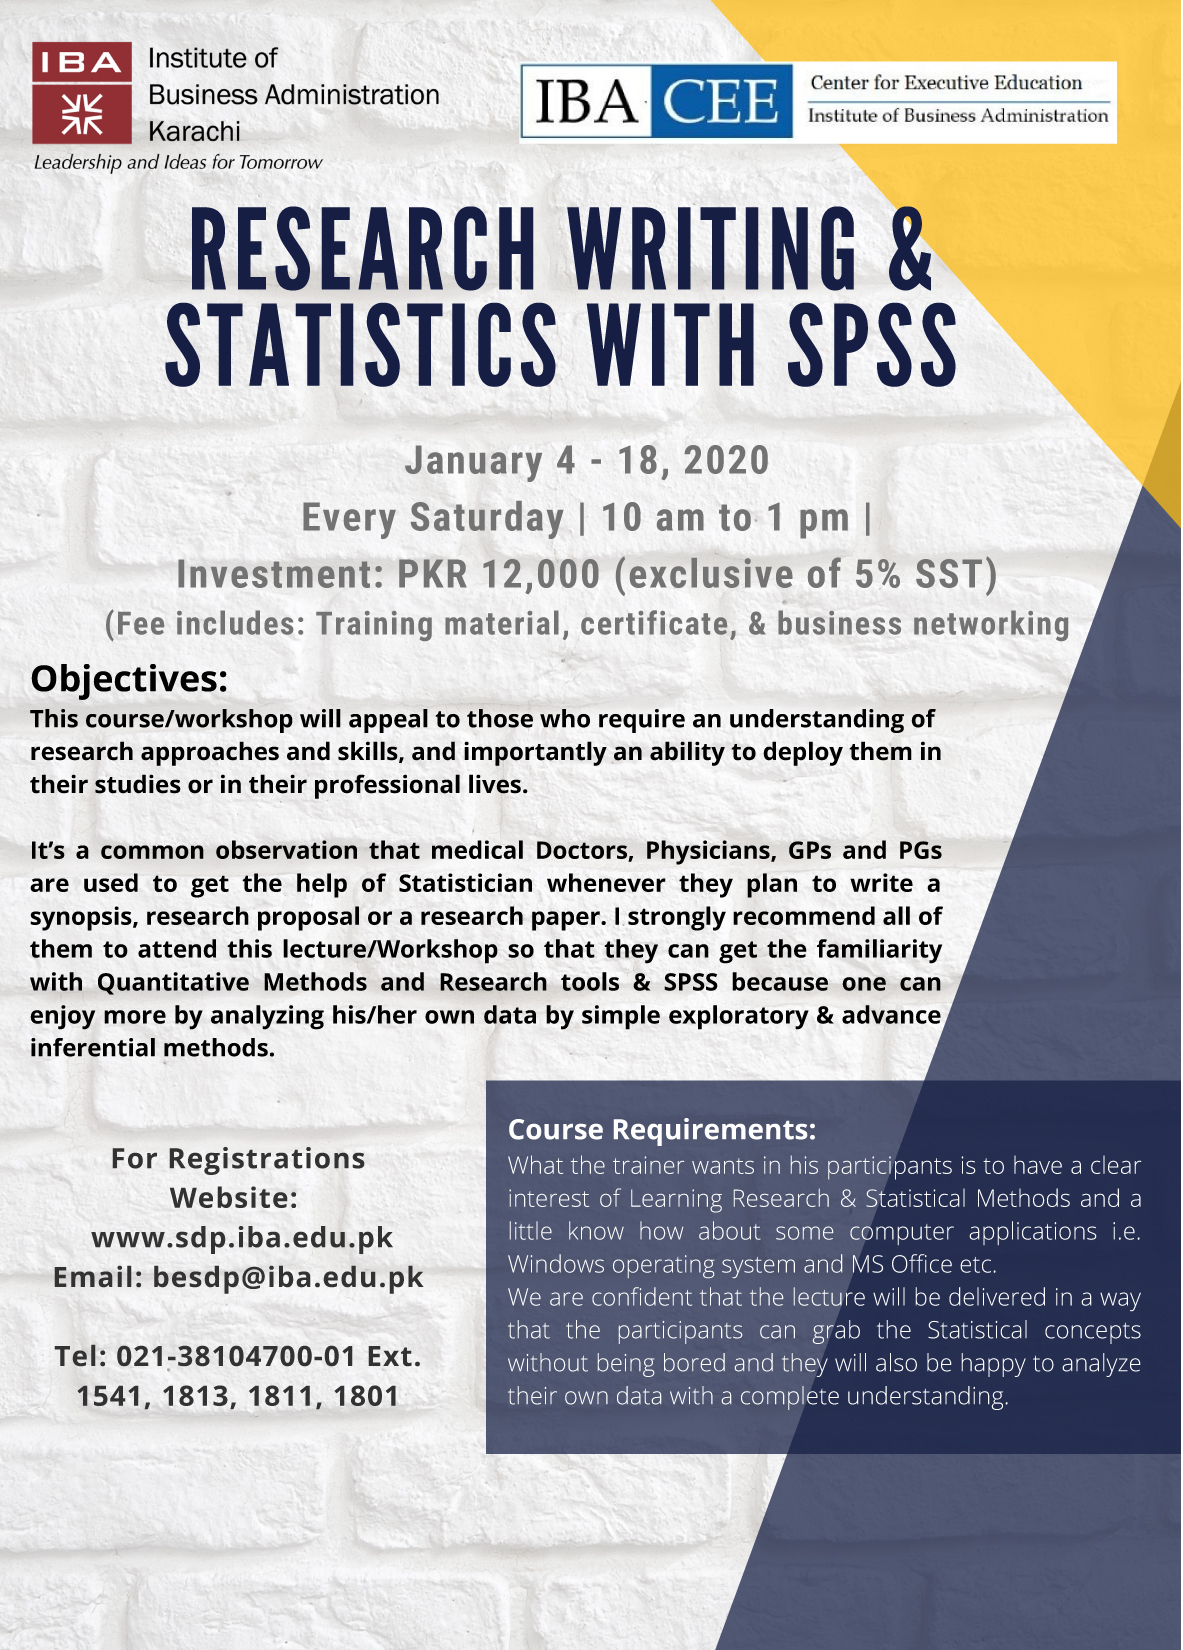 Research Writing & Statistics with SPSS